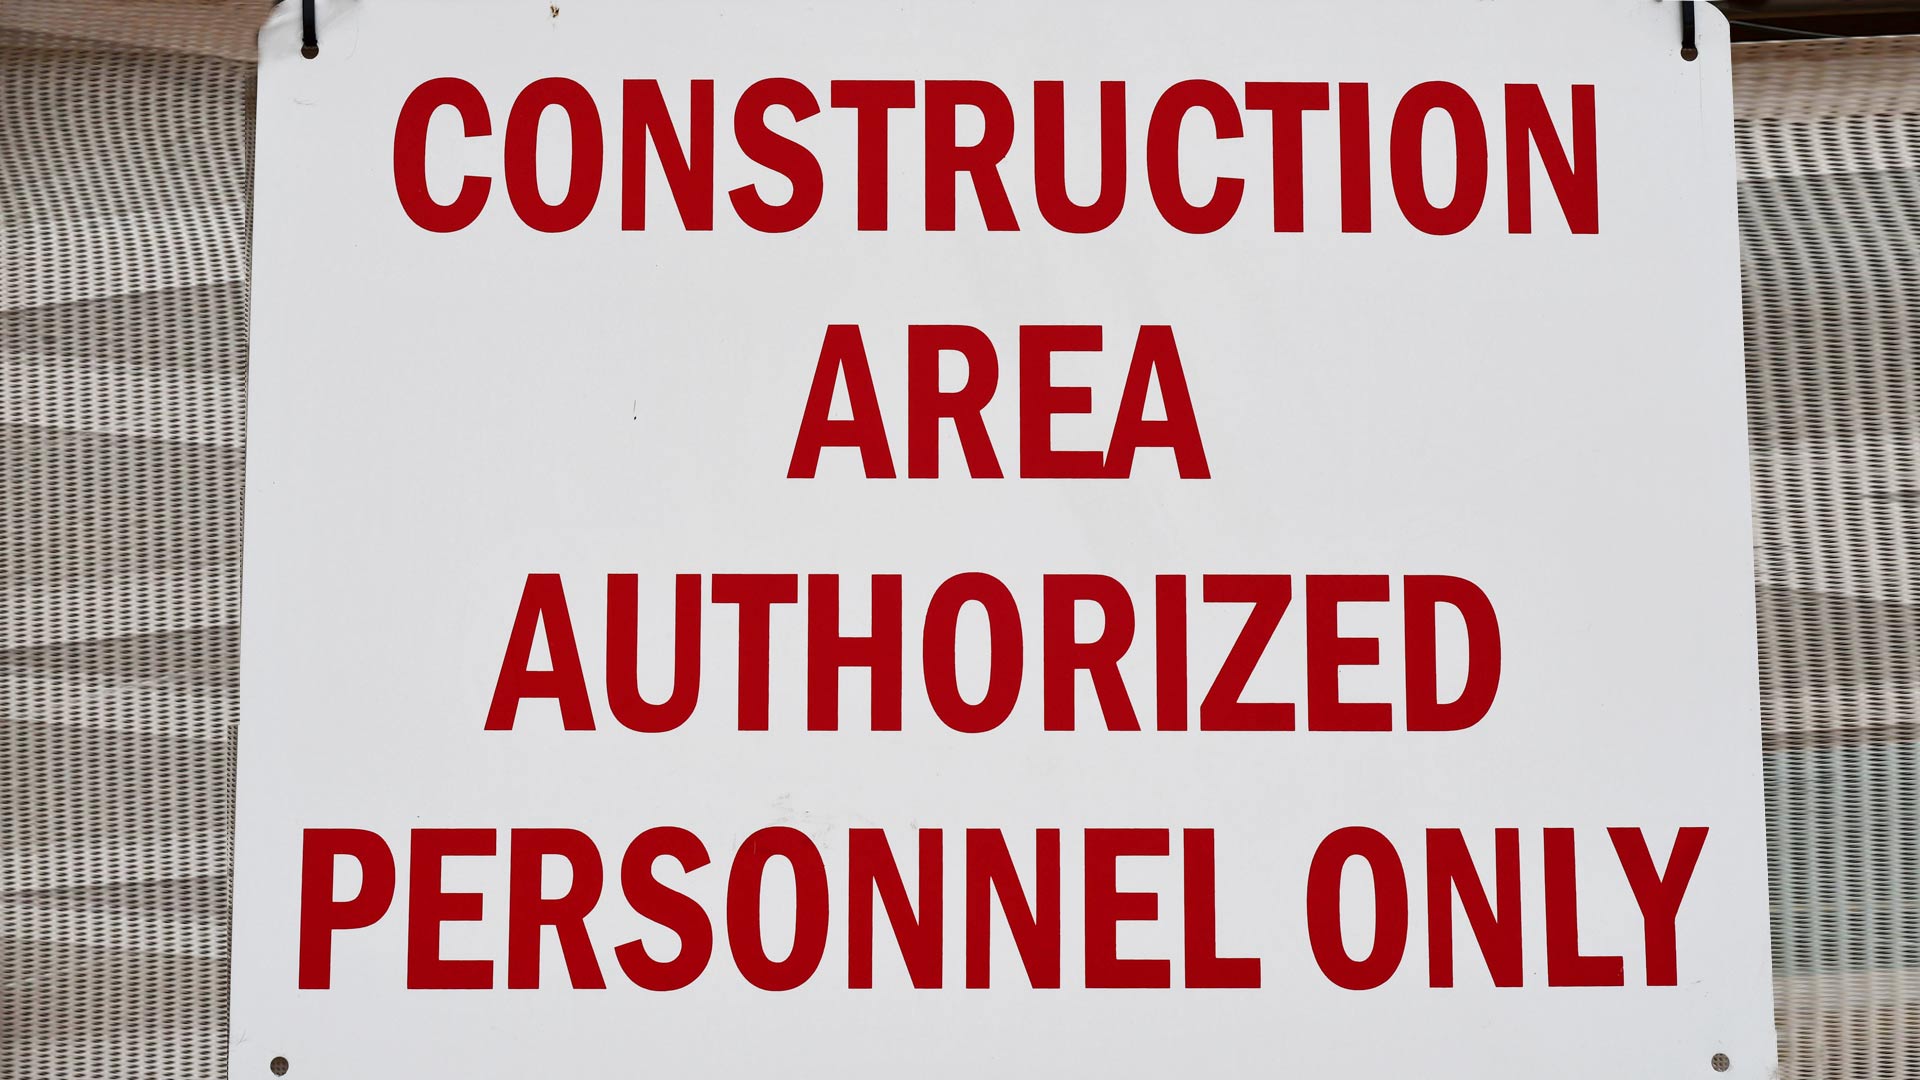 Construction Area Only sign